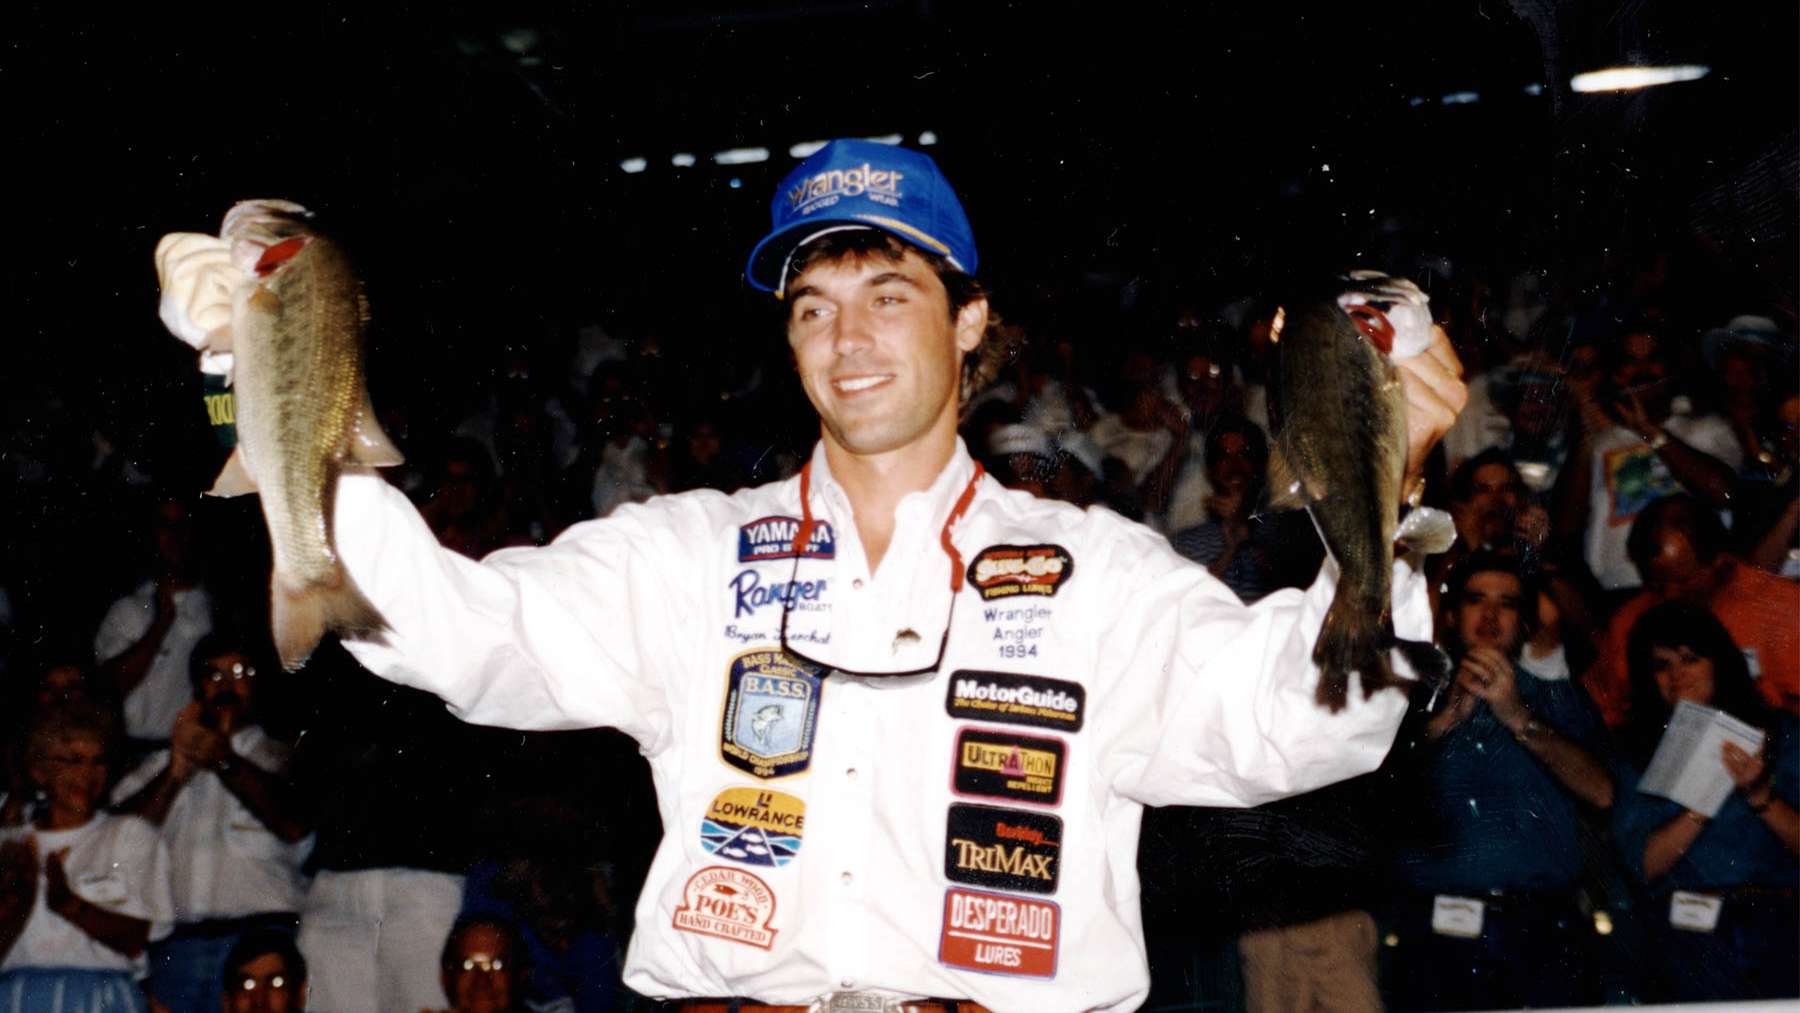 But those are just the anglers who were living in Texas at the time they won the Classic. More Classic champs were born in Texas than any other state, too, though the names might surprise you. The four Classic winners born in the Lone Star State were Alton Jones (Baylor), Tommy Martin (Livingston), Bobby Murray (Longview) and Bryan Kerchal, pictured above, (Dallas). The other Texas-resident winners were born elsewhere â Clunn in California, Nixon in Washington, Yelas in Hawaii and Omori in Japan.